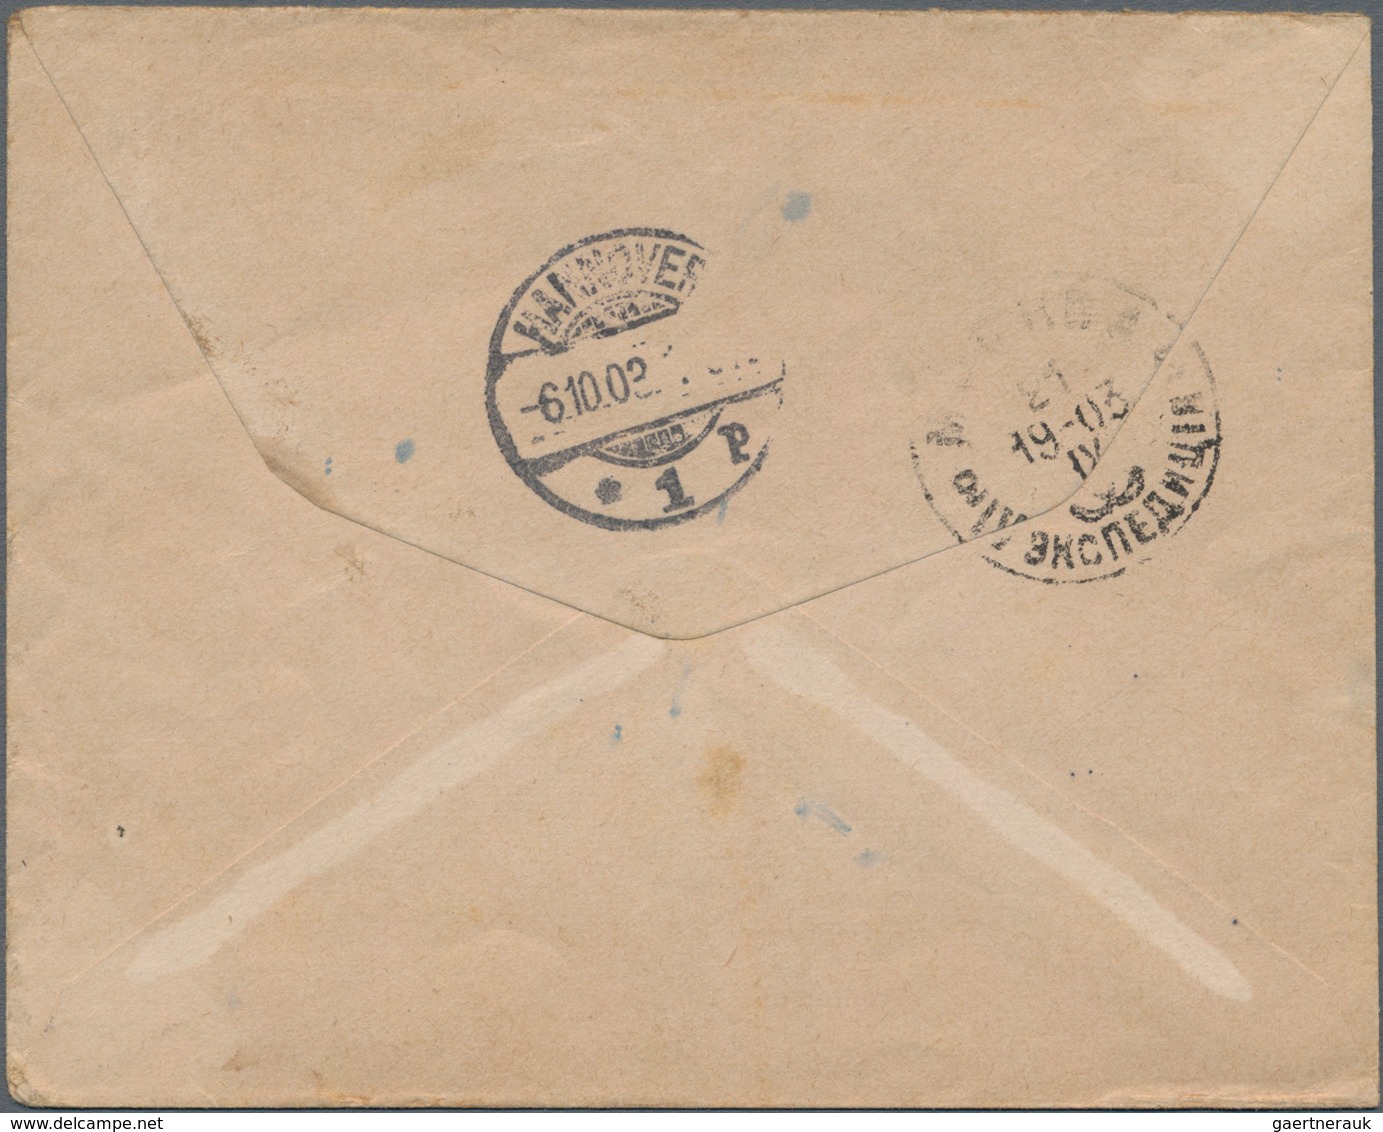 Russische Post in China: 1899/1910, covers (2), ppc (3) and used stationery (1) from Peking, Tientsi